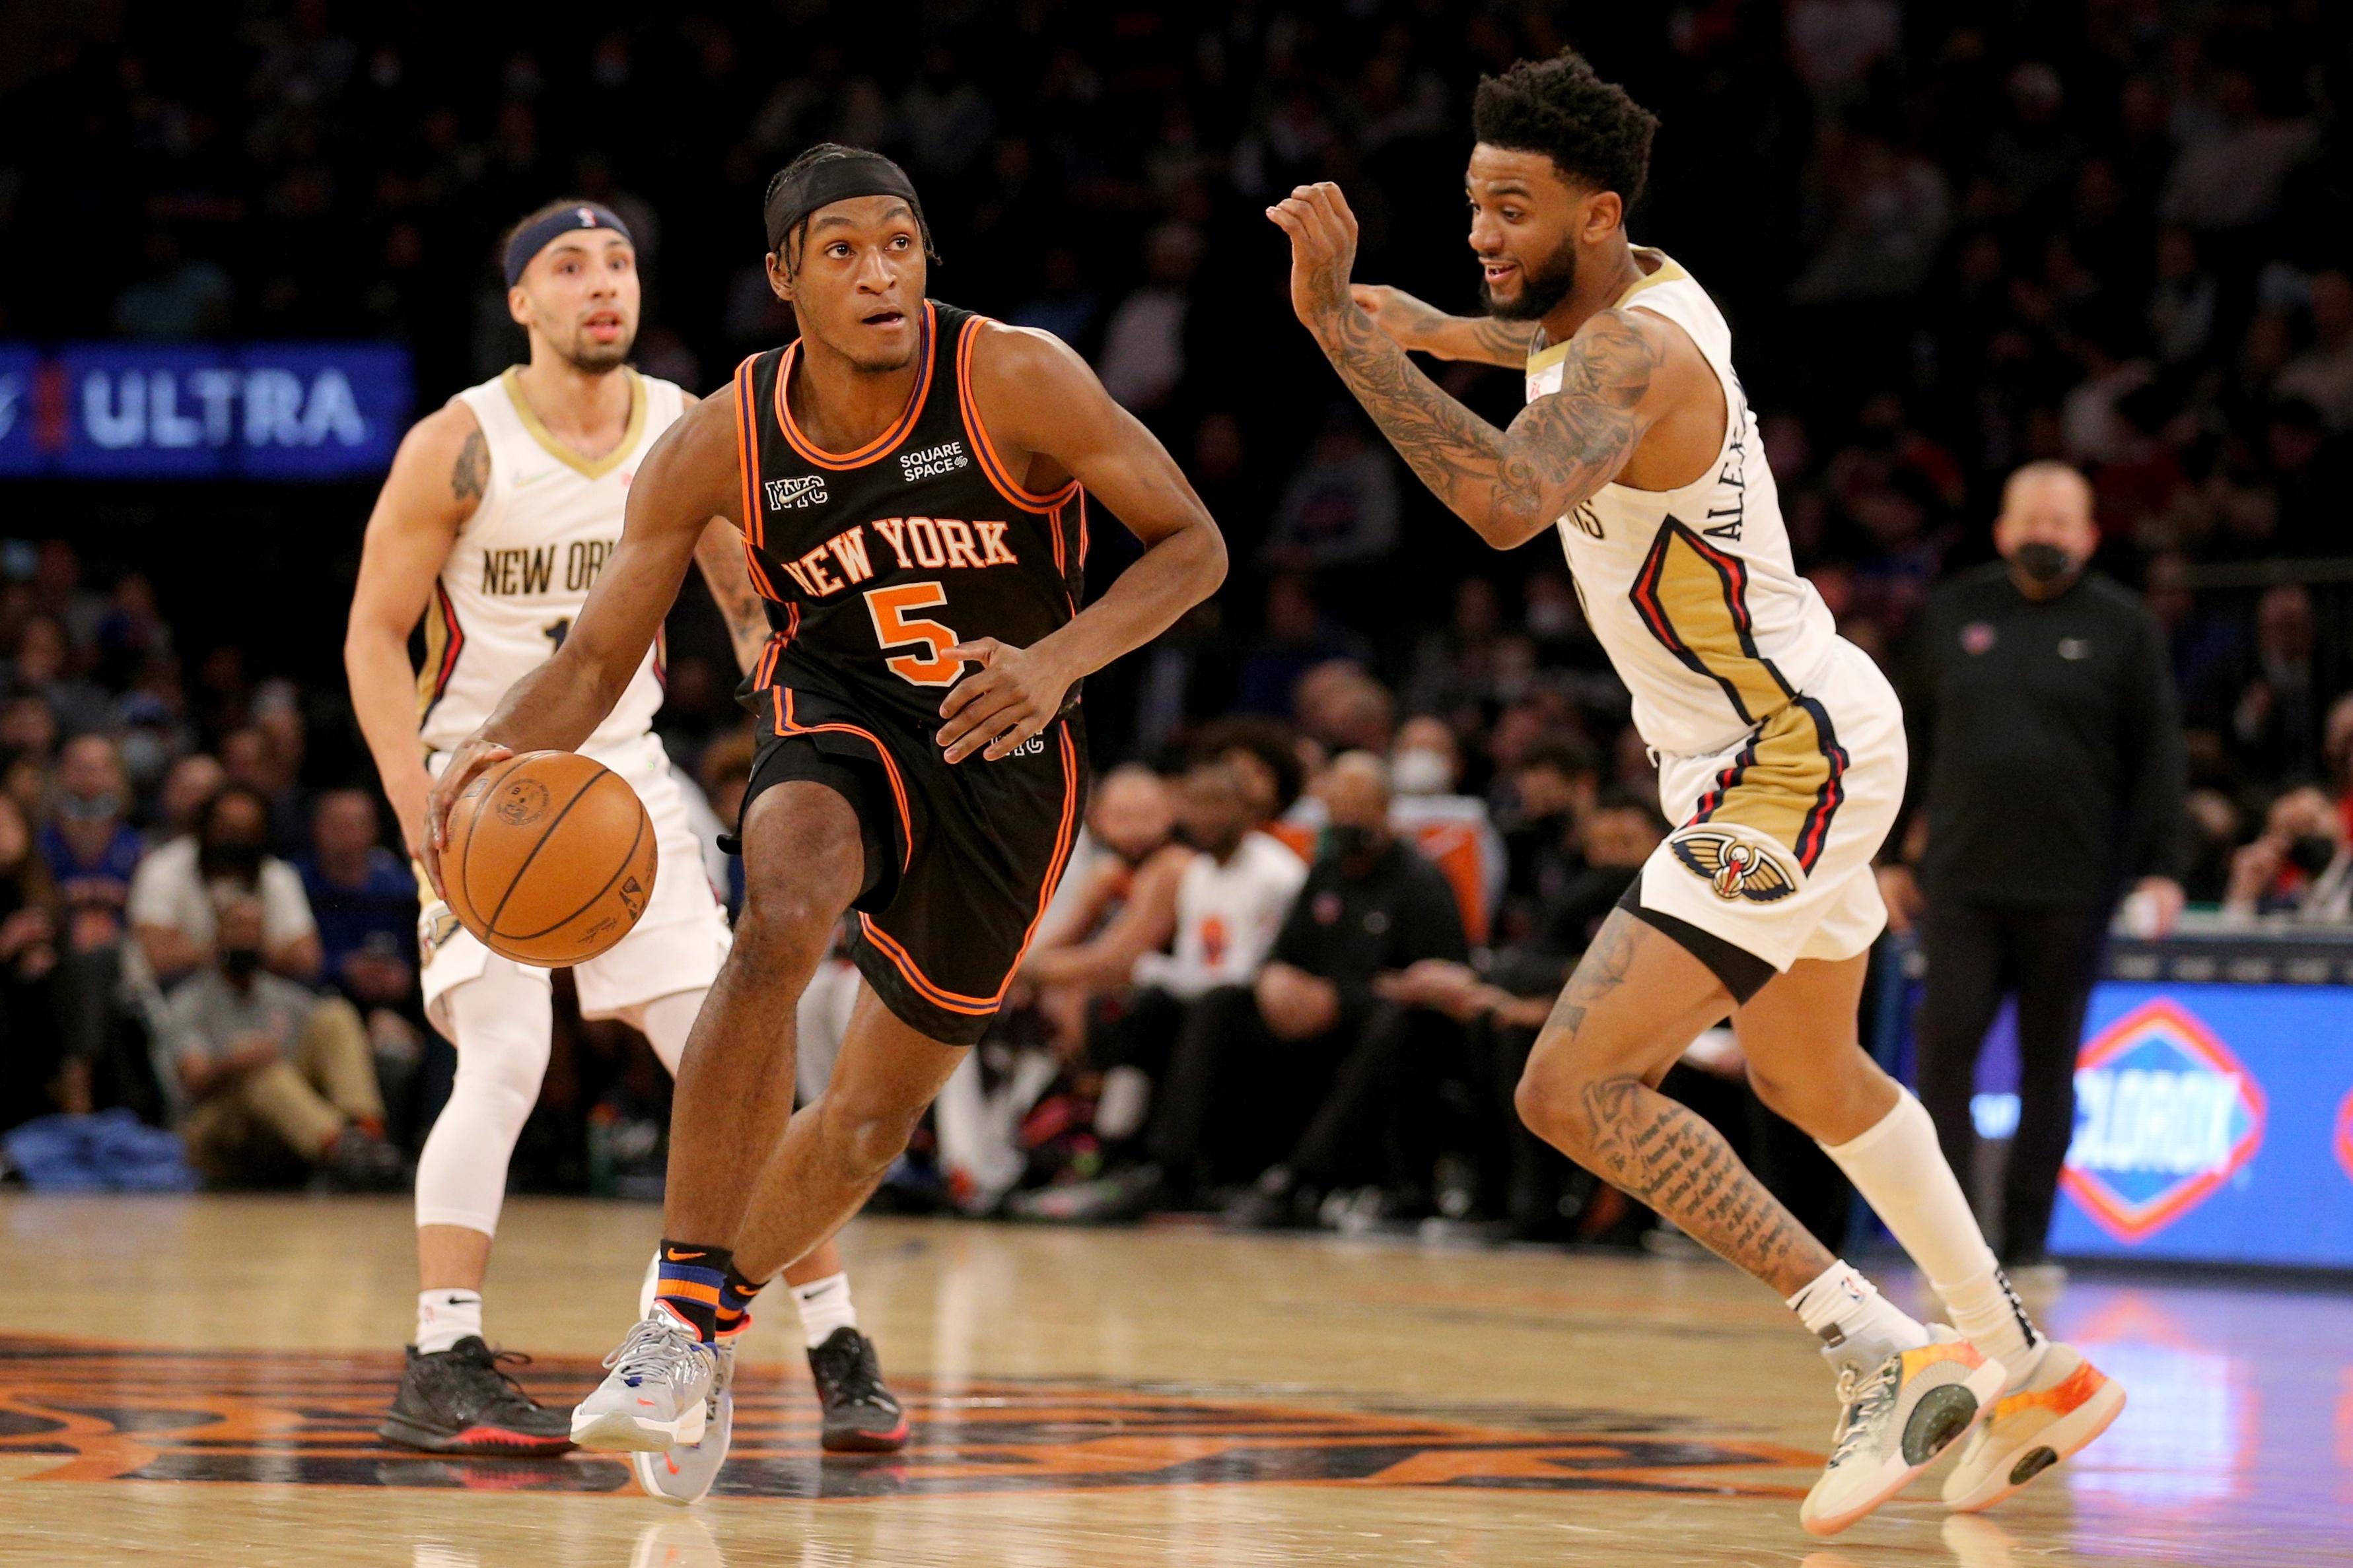 New York Knicks guard Immanuel Quickley (5) brings the ball up court against New Orleans Pelicans guard Nickeil Alexander-Walker (6) and guard Jose Alvarado (15) during the first quarter at Madison Square Garden. / Brad Penner-USA TODAY Sports